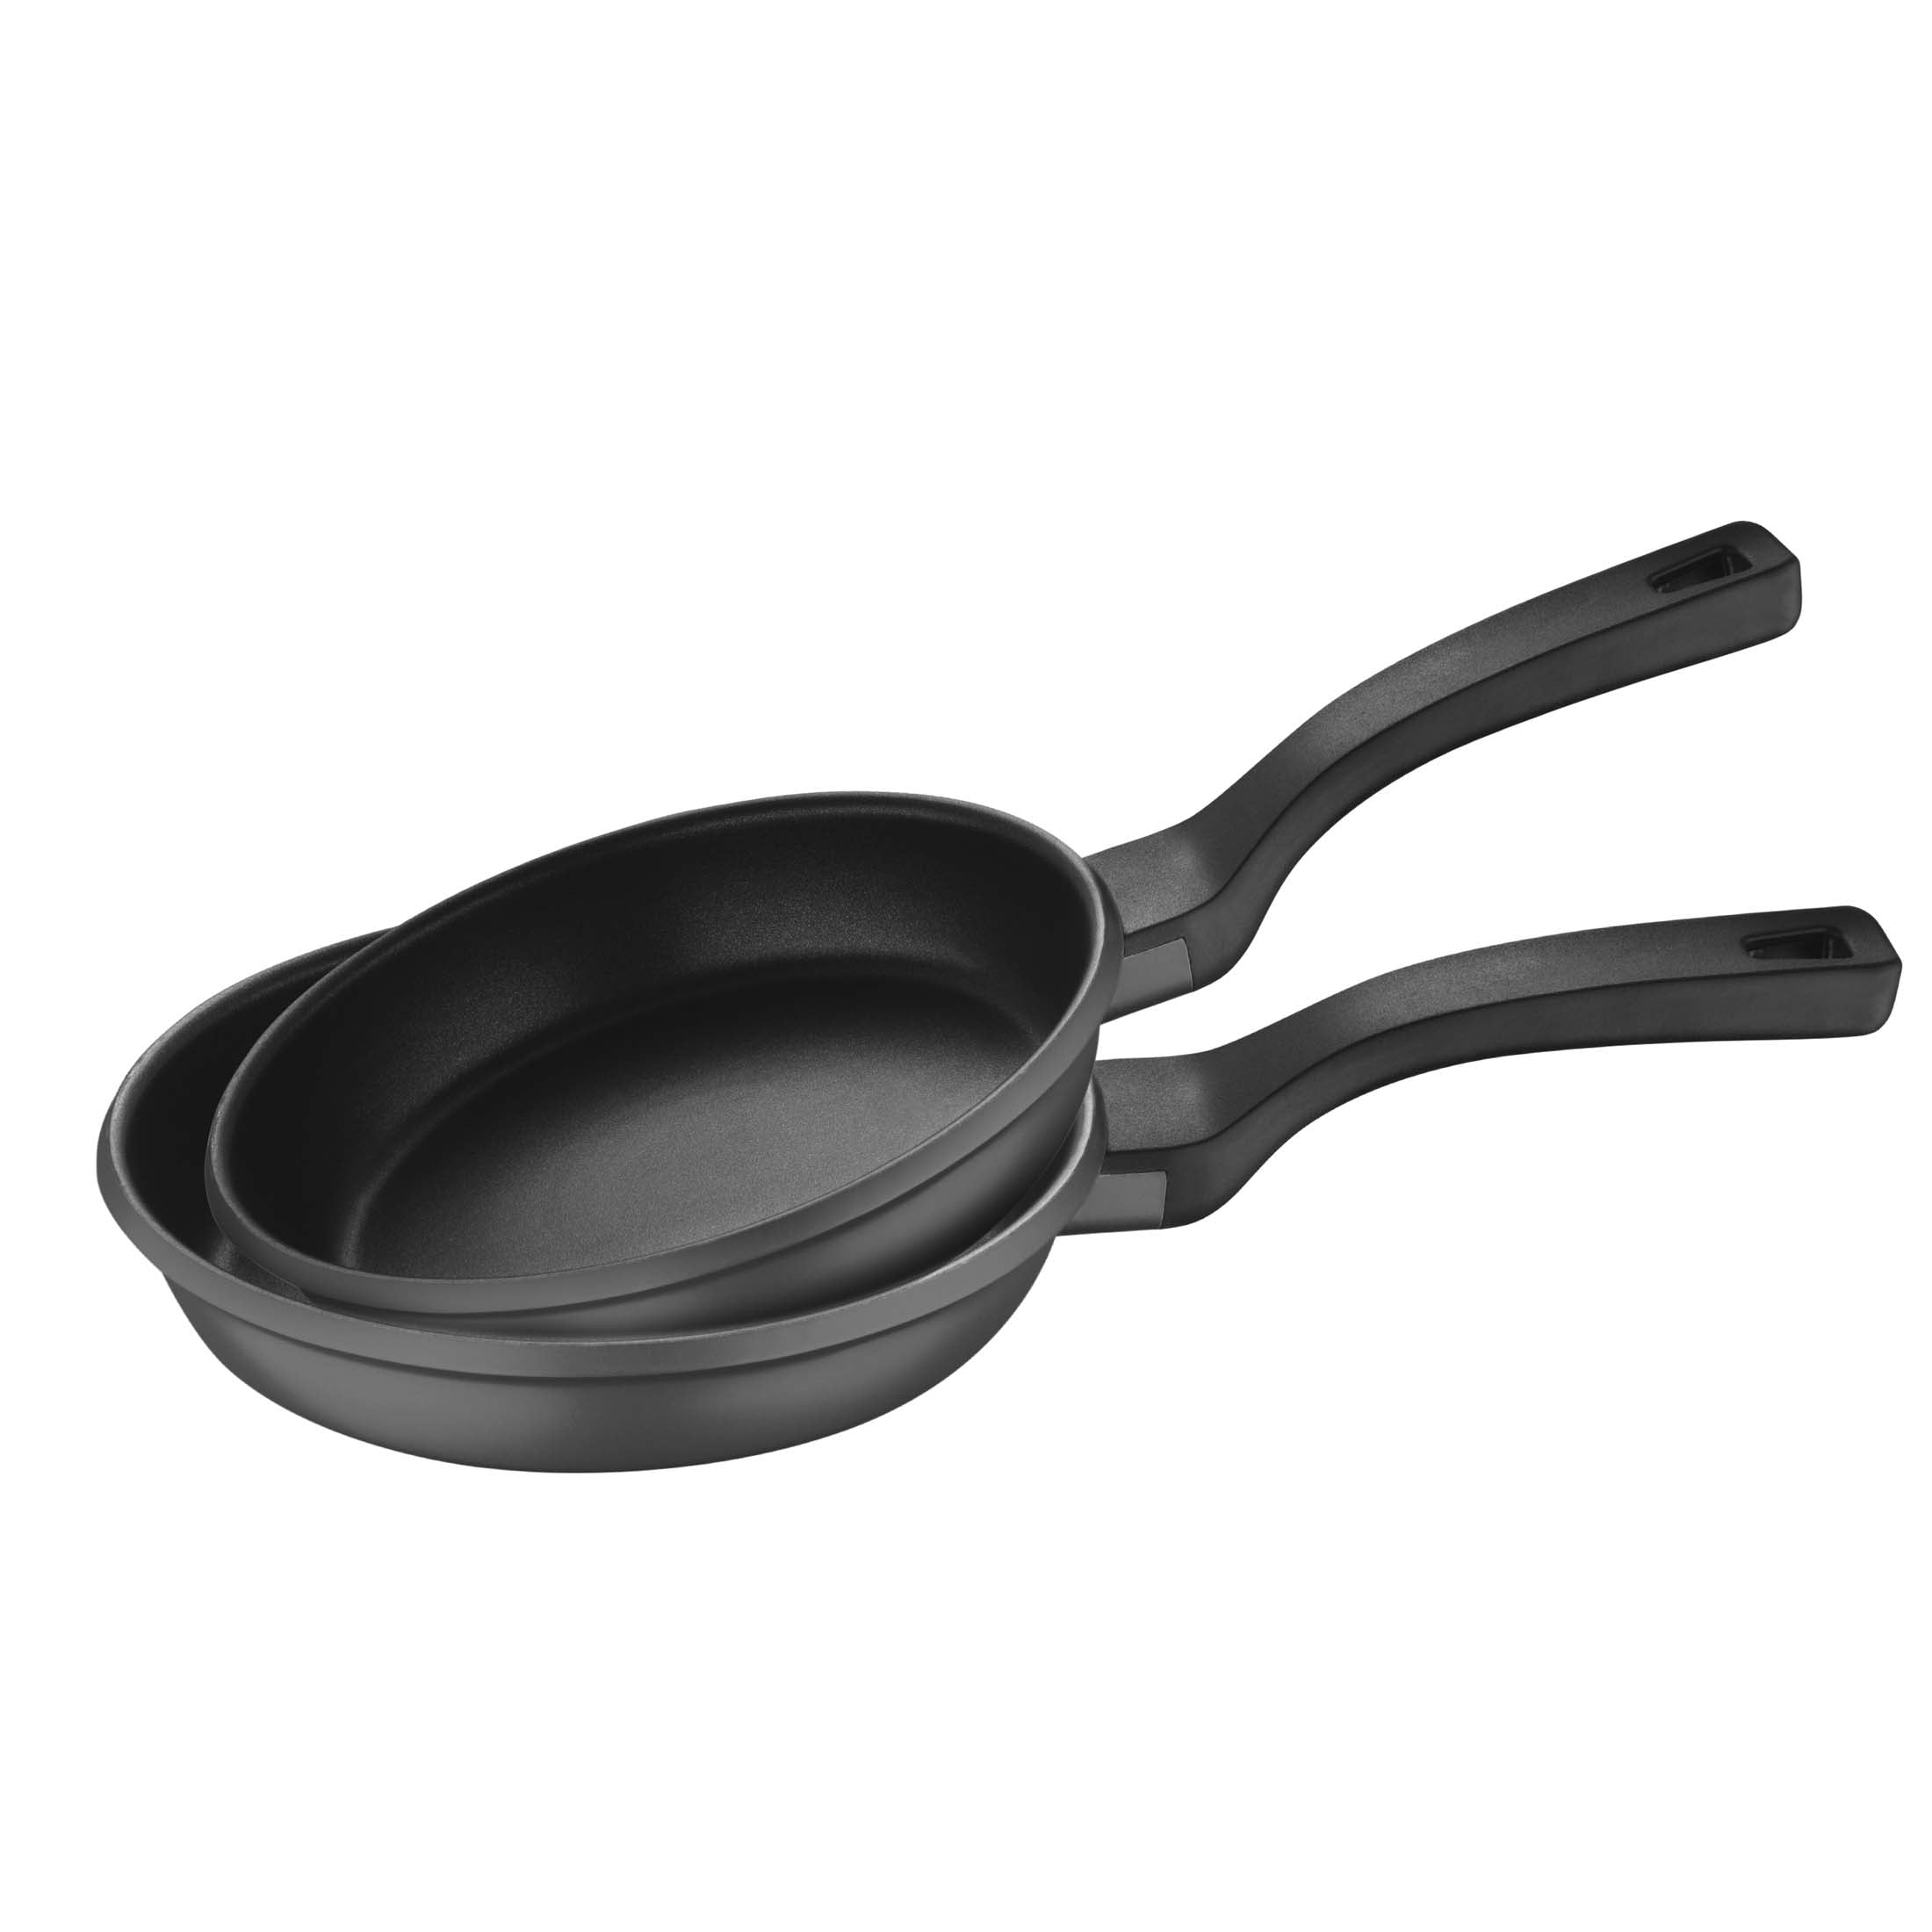 Professional Cast Aluminium Serving Frying Pan Suitable for all hob types 